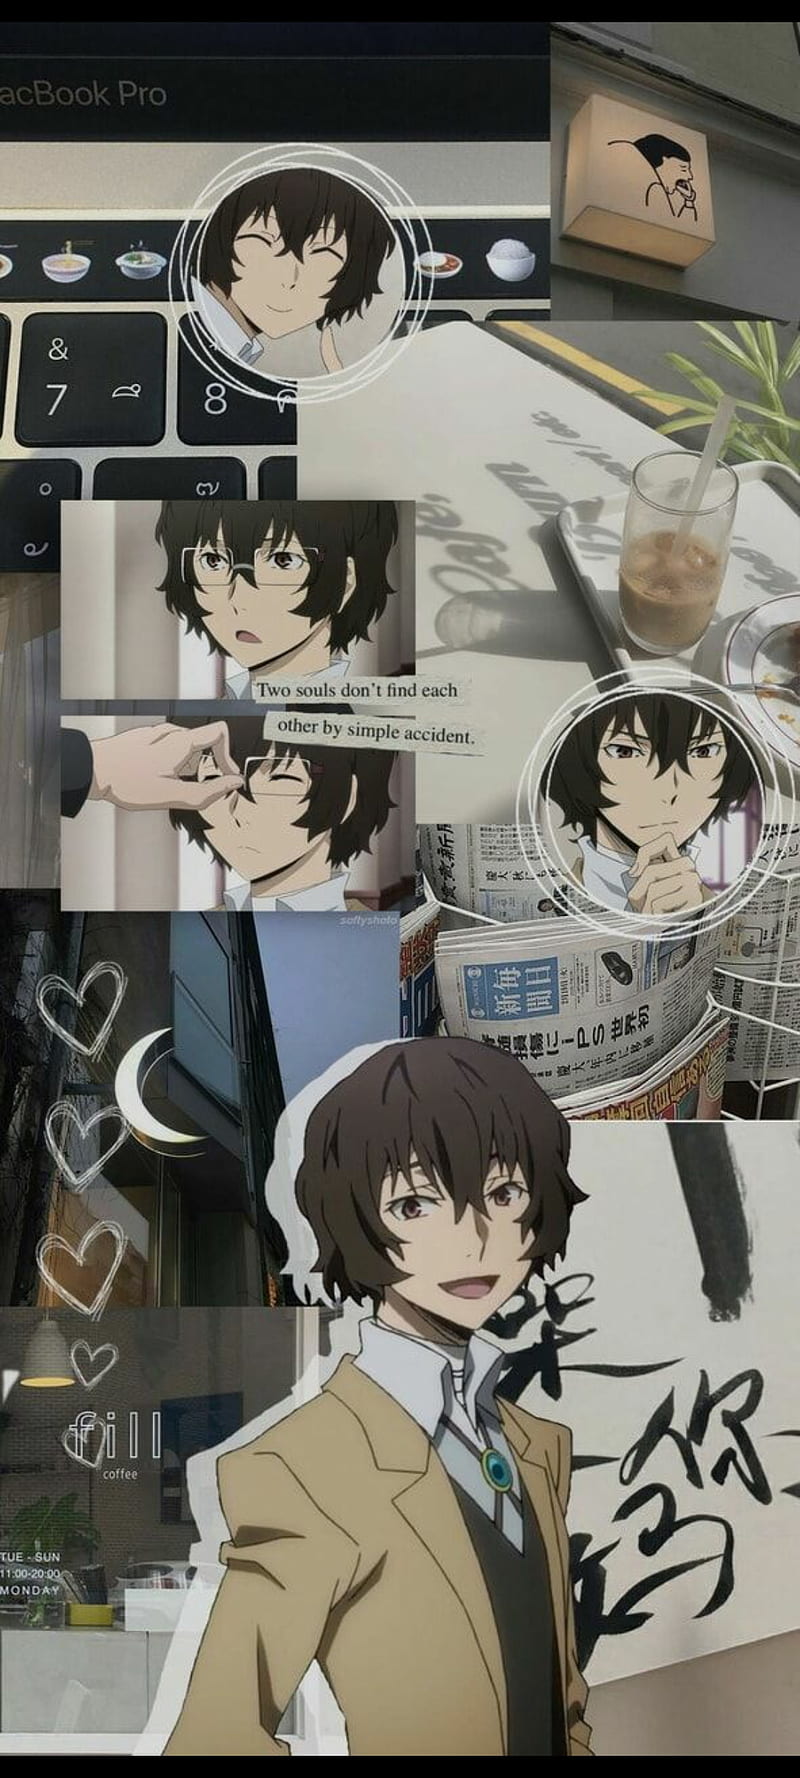 Dazai Osamu in 9 Anime Styles Hope You like it. Please Support me by doing  Like Comment Share Save Commissions are open #dazai… | Instagram